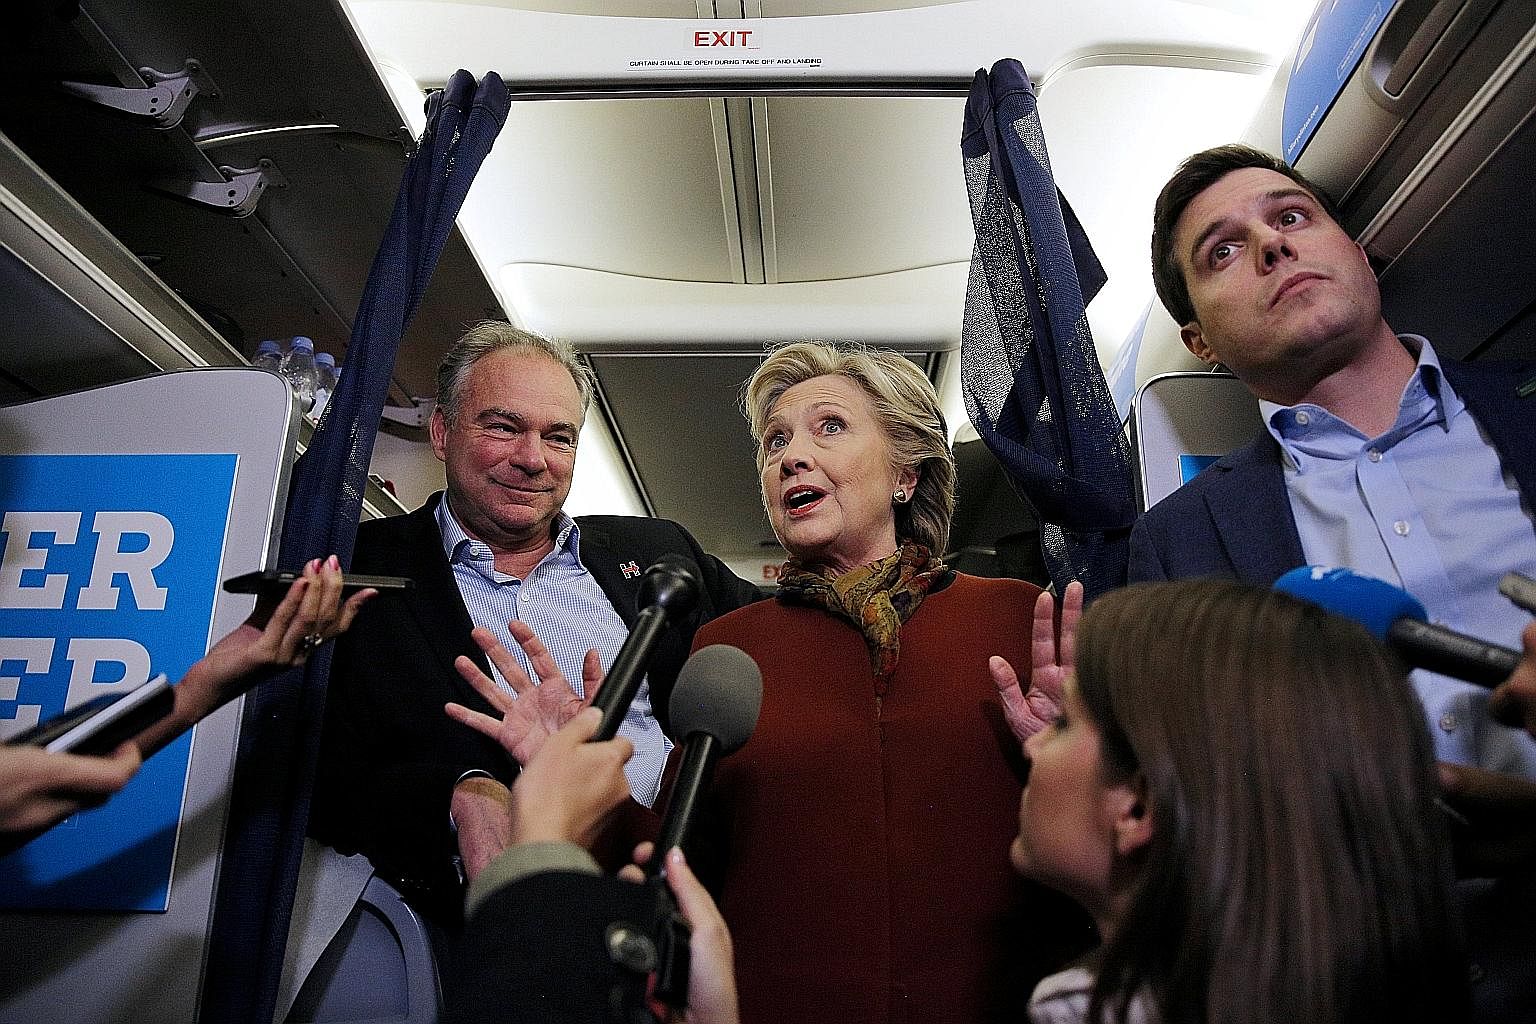 US Democratic presidential candidate Hillary Clinton and vice-presidential candidate Tim Kaine with the media inside a campaign plane. A recent poll showed that concern over media objectivity has spilled over to the public square.